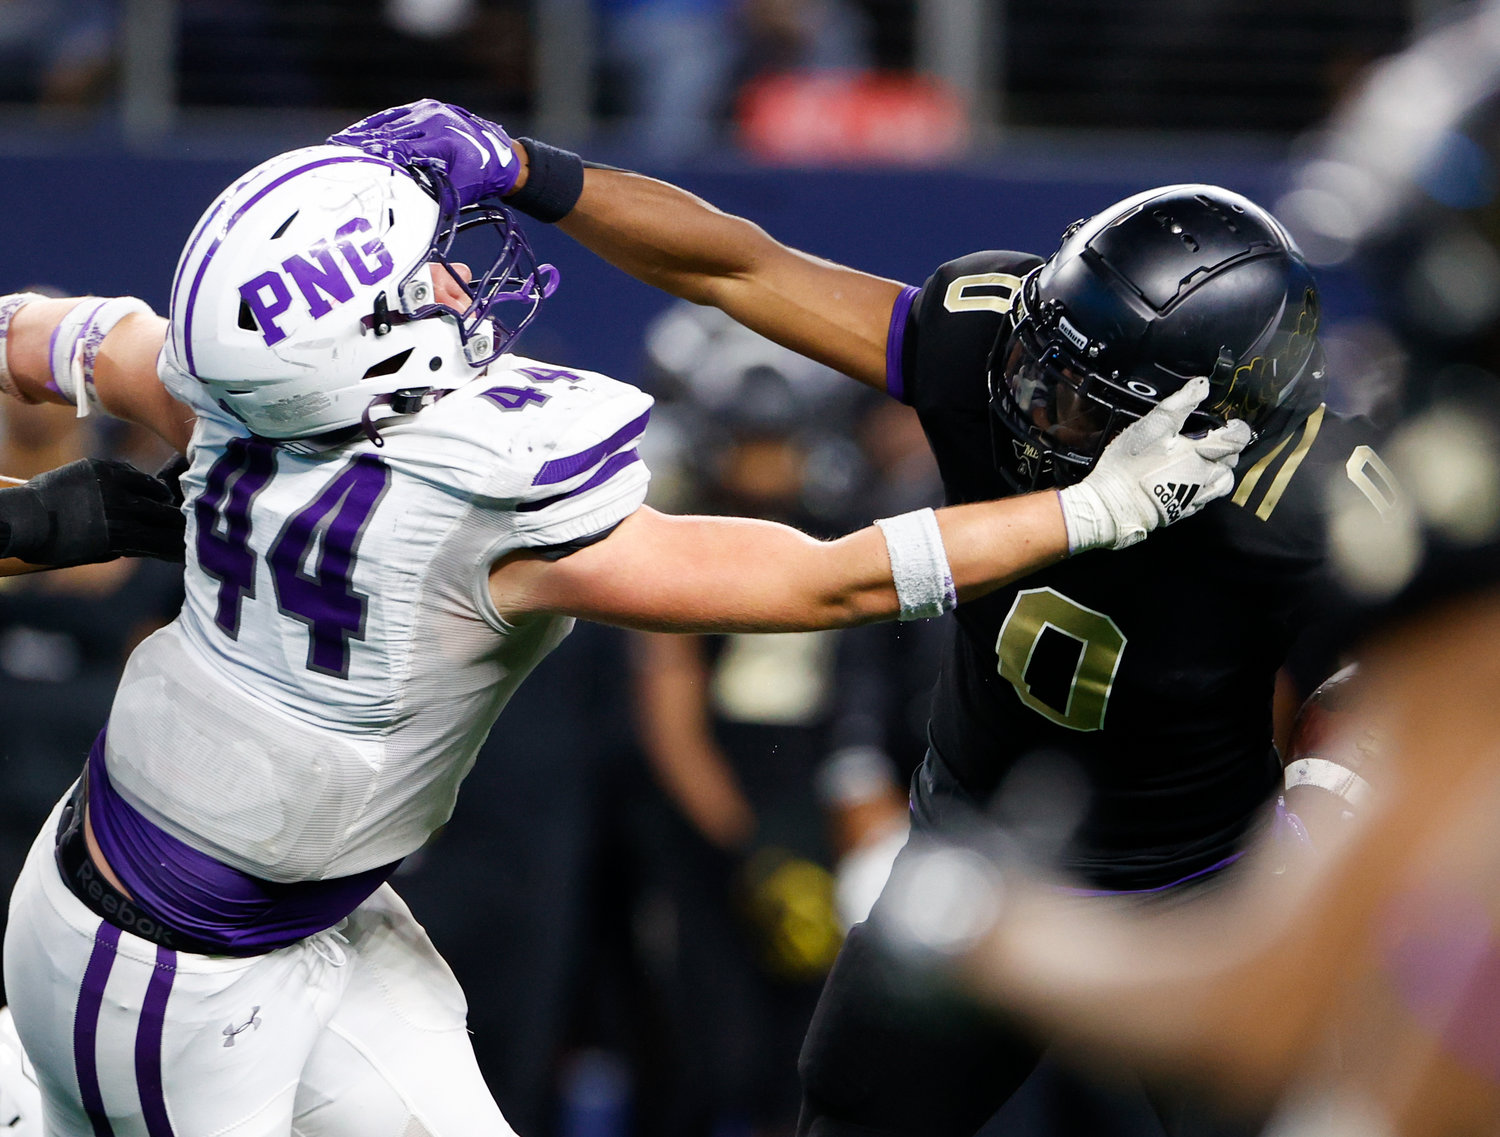 Port Neches-Groves defensive lineman Peyton Broom (44) and South Oak Cliff running back Jayvon Thomas (0) grab each other’s facemask on a carry during the Class 5A Division II football state championship game between South Oak Cliff and Port Neches-Groves in Arlington, Texas, on Dec. 16, 2022.